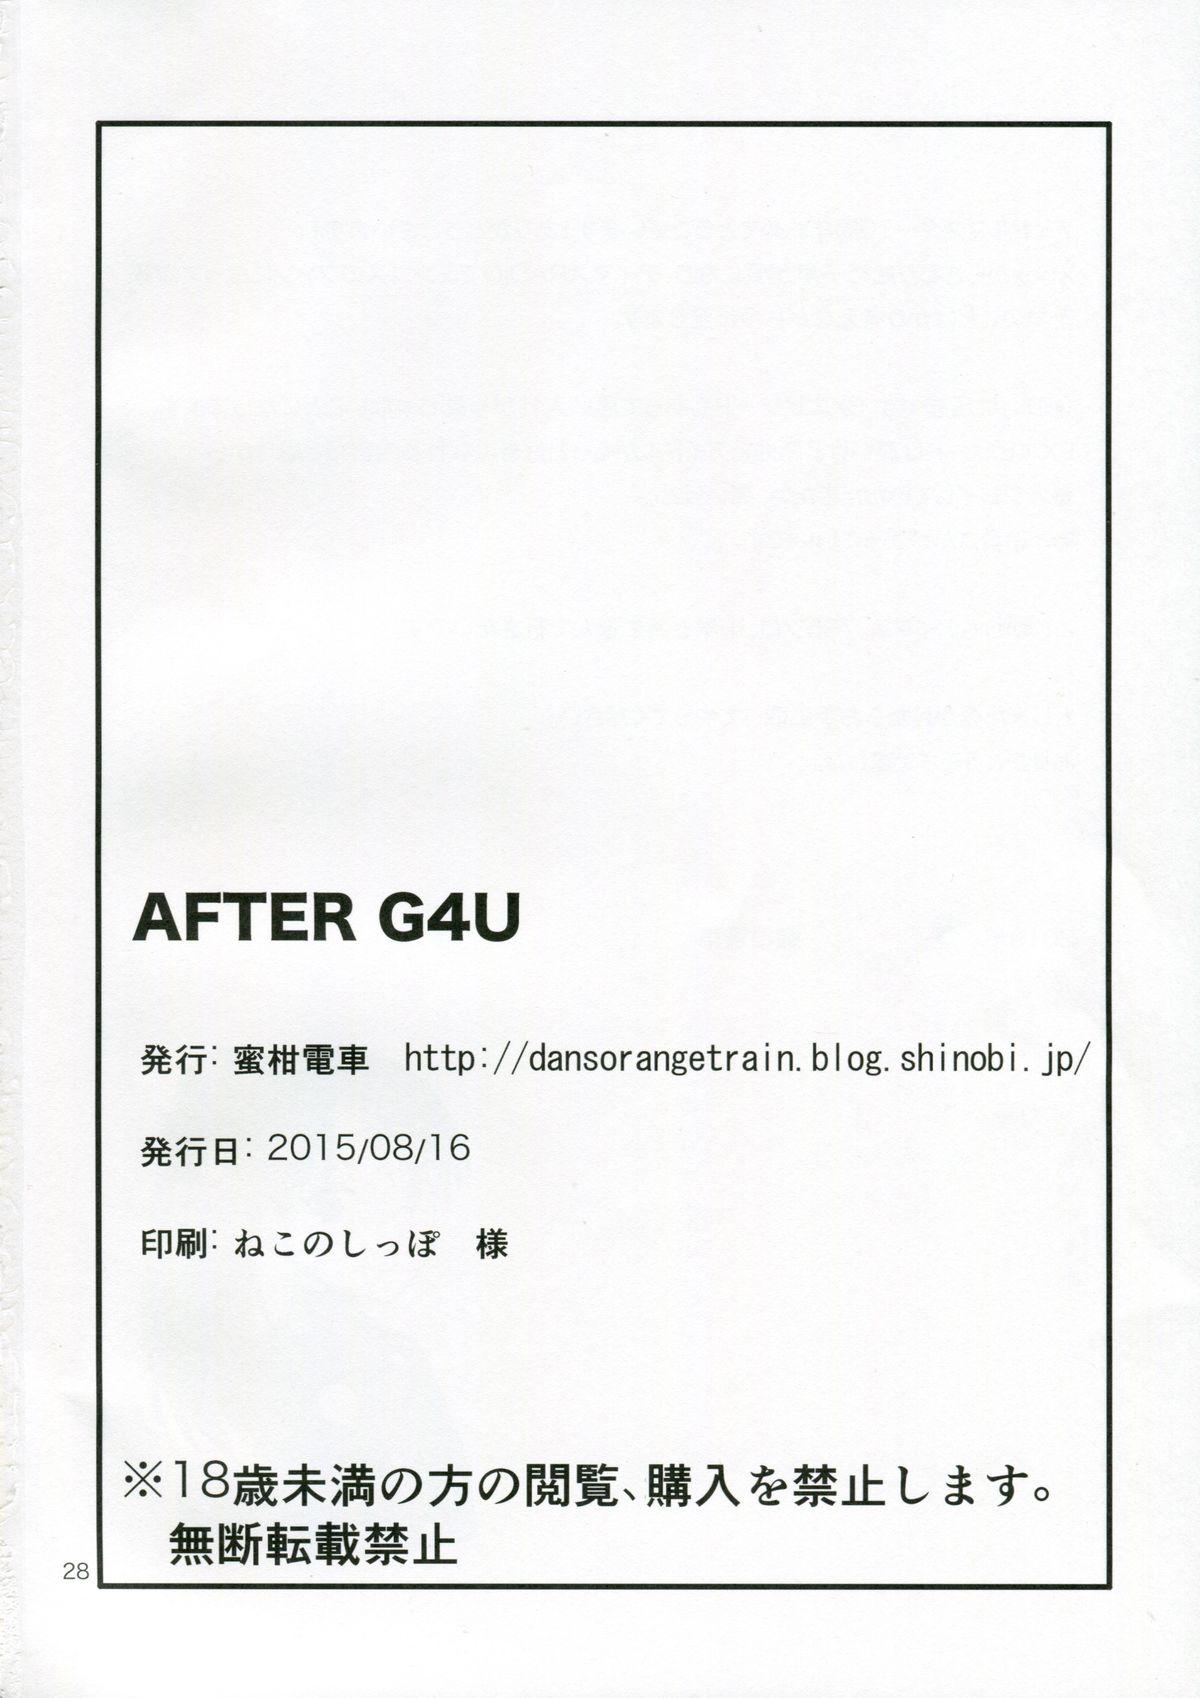 Best Blow Job Ever After G4U! - The idolmaster Gay Anal - Page 29